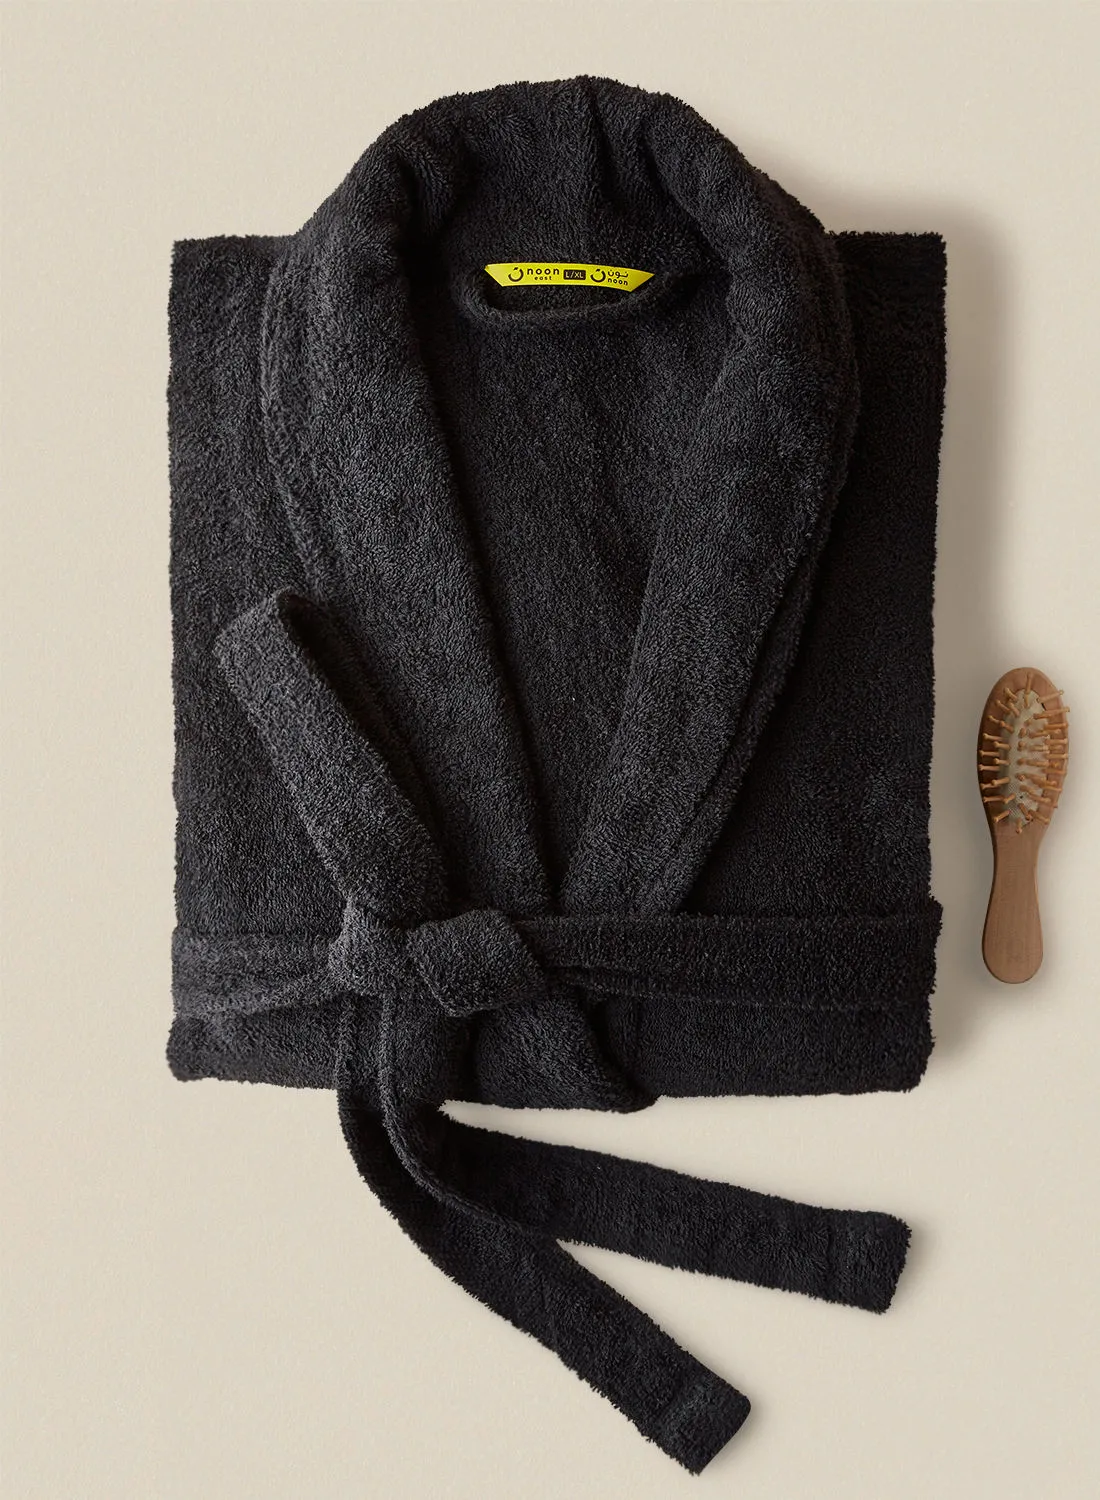 noon east Bathrobe - 380 GSM 100% Cotton Terry Silky Soft Spa Quality Comfort - Shawl Collar & Pocket - Black Color - 1 Piece